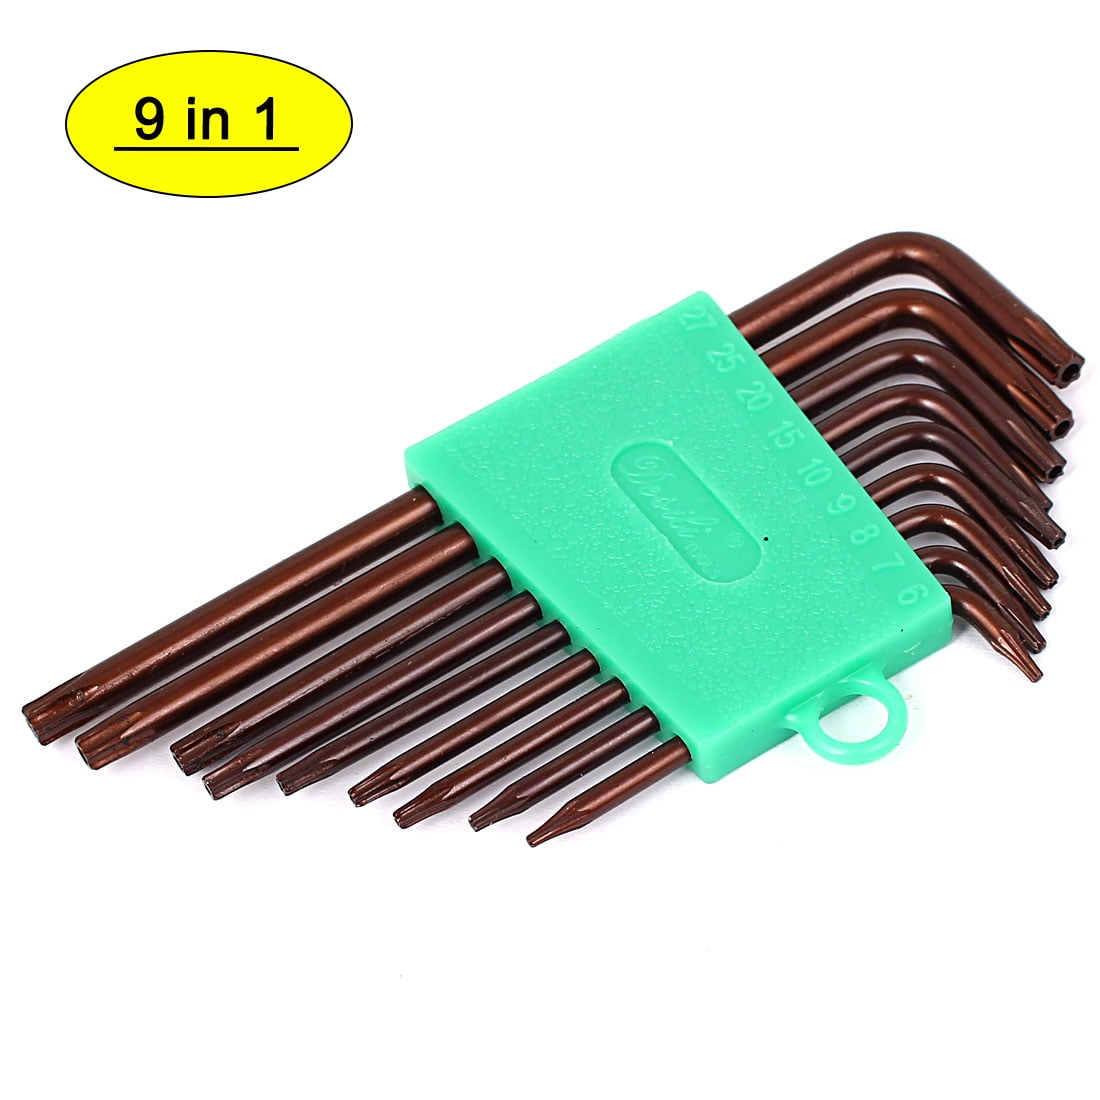 New Lon0167 T6-T27 L Featured Style S2 Security reliable efficacy Torx Key Wrench Spanner Tools Brown 9 in 1 id:22d a5 cc def 